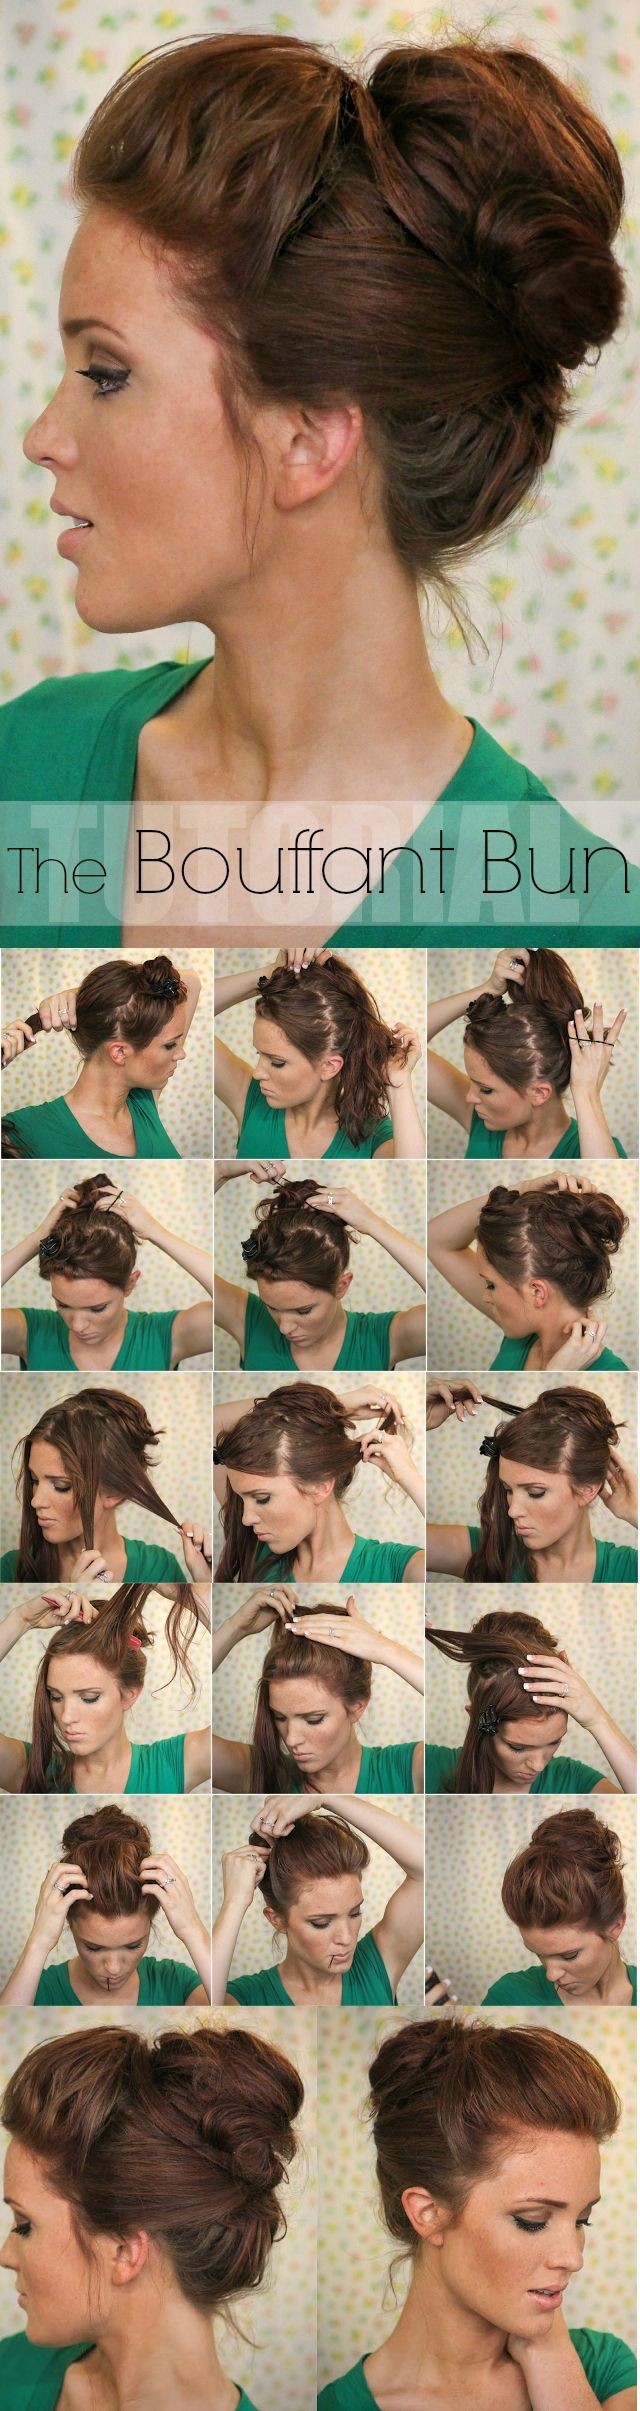 10 Super Easy Updo Hairstyles Tutorials Popular Haircuts